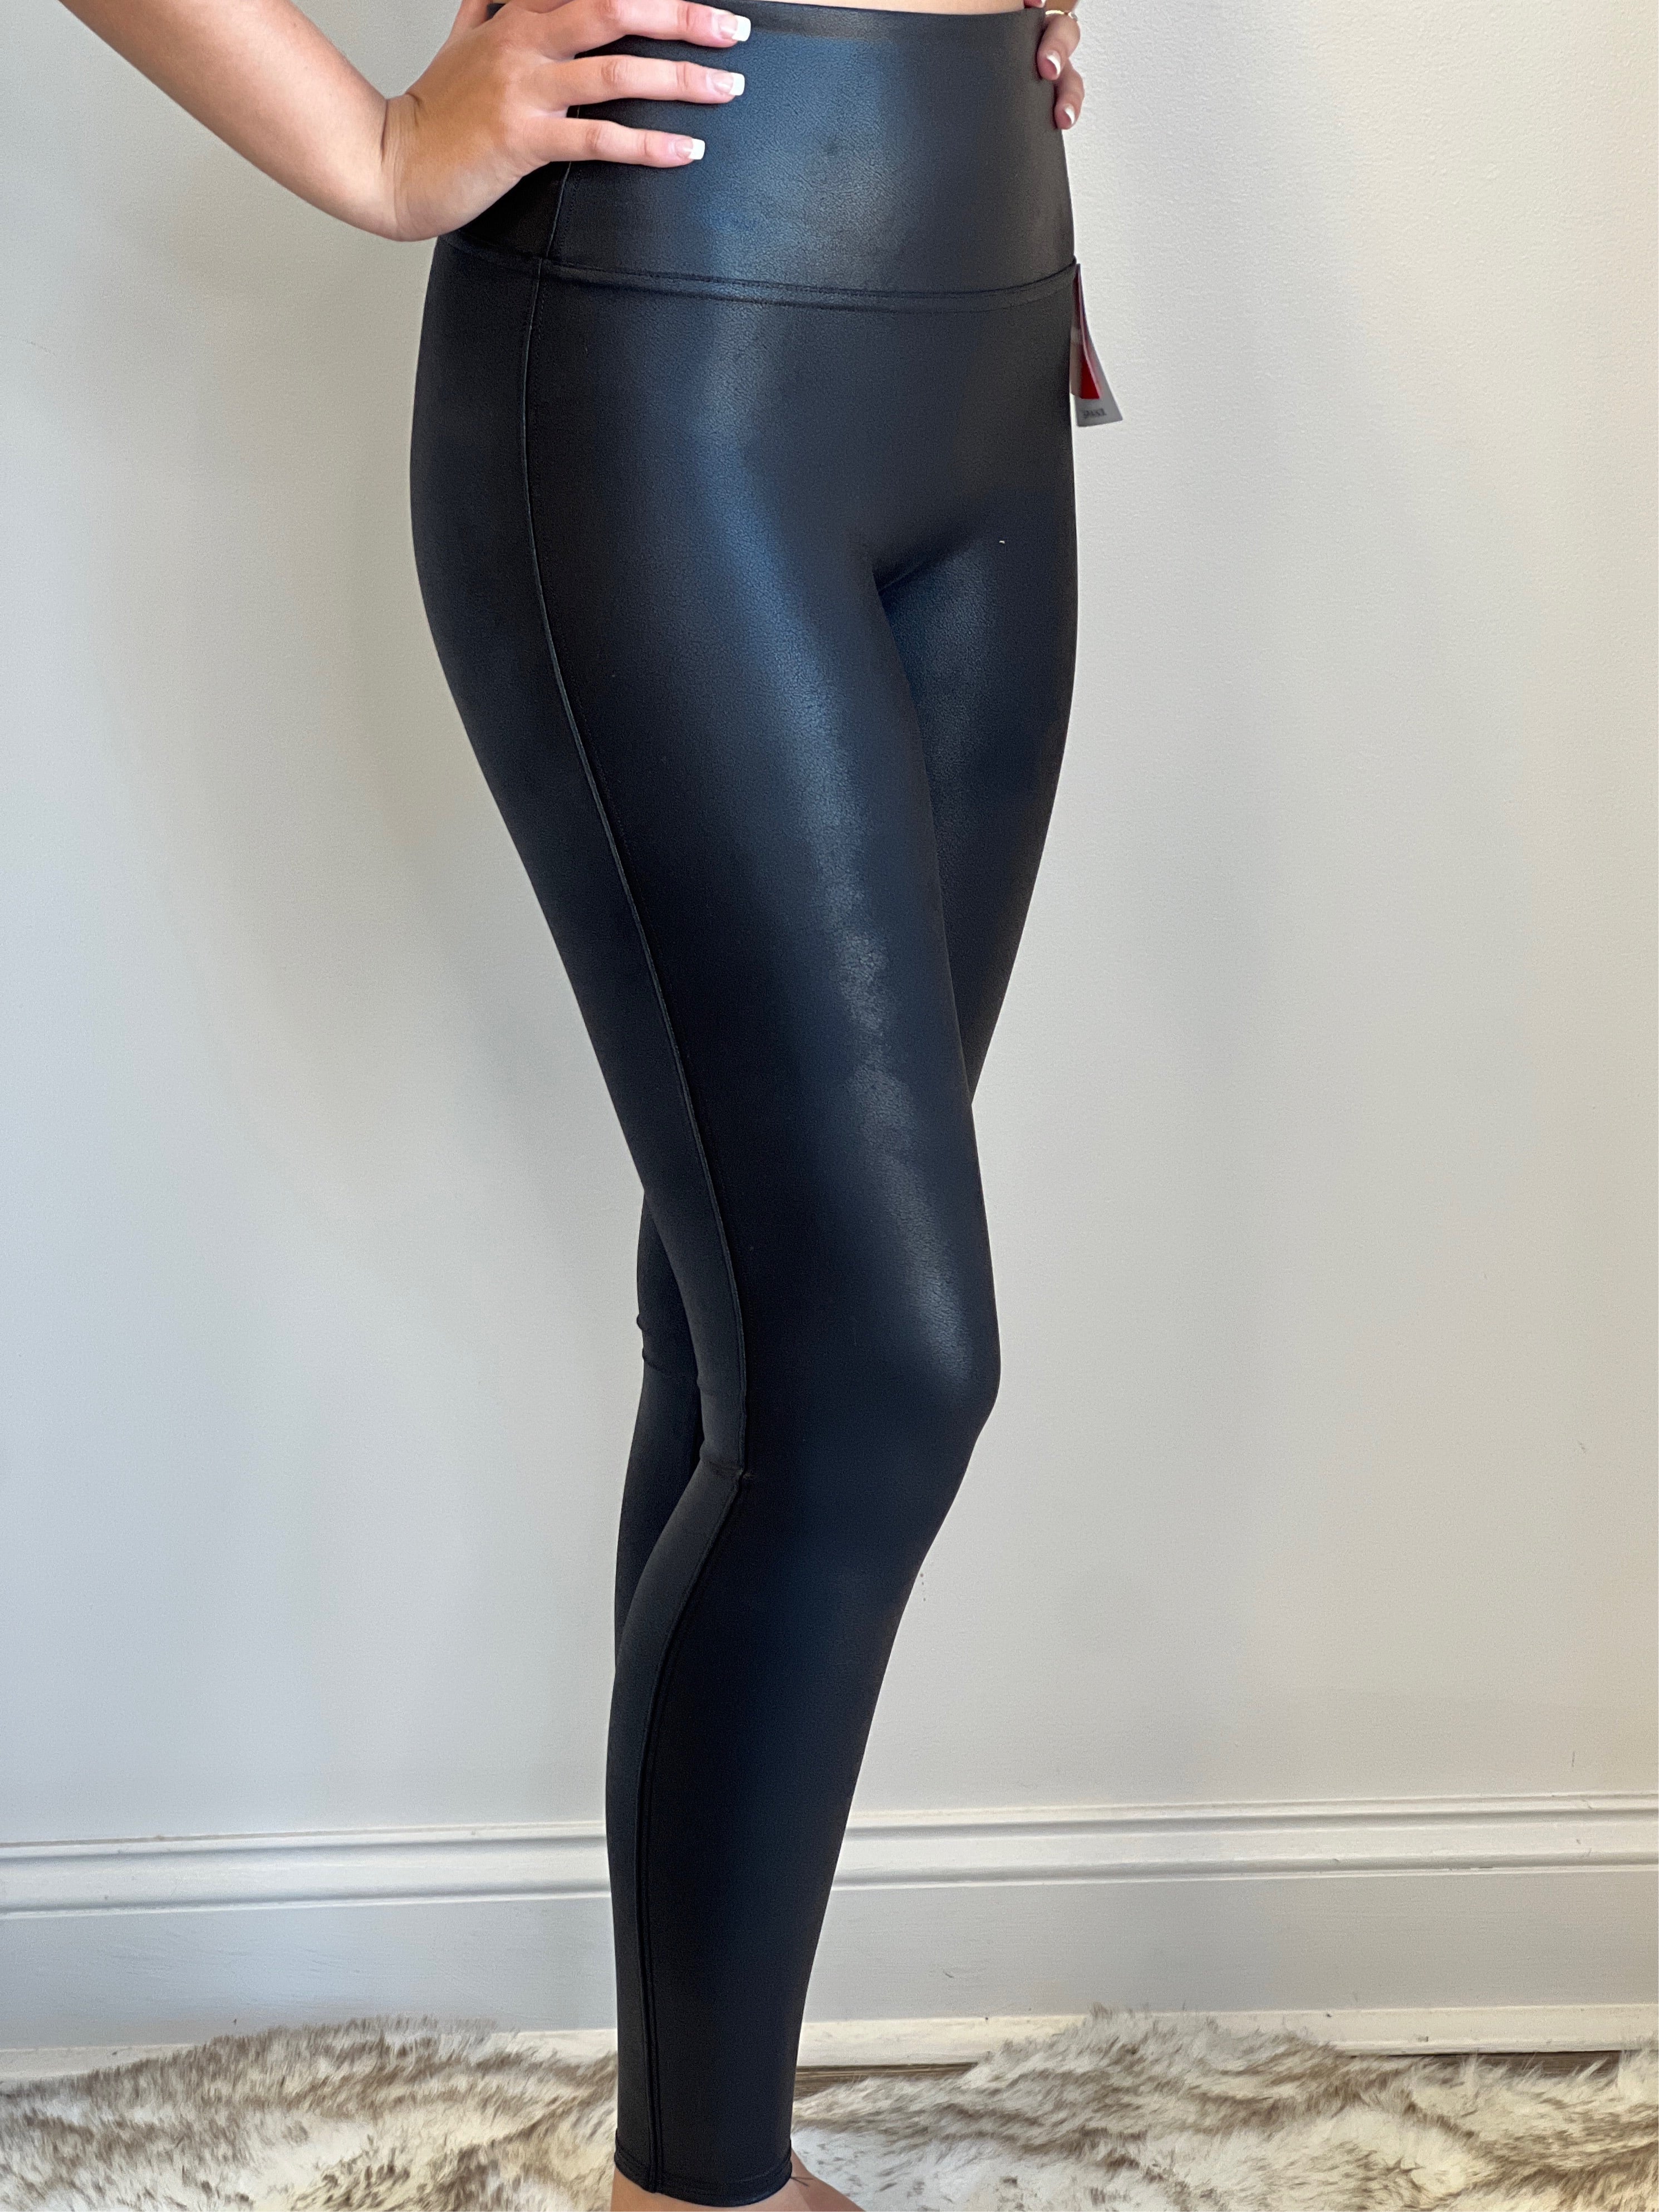 SPANX, Pants & Jumpsuits, Spanx Faux Leather Leggings In Black Size Small